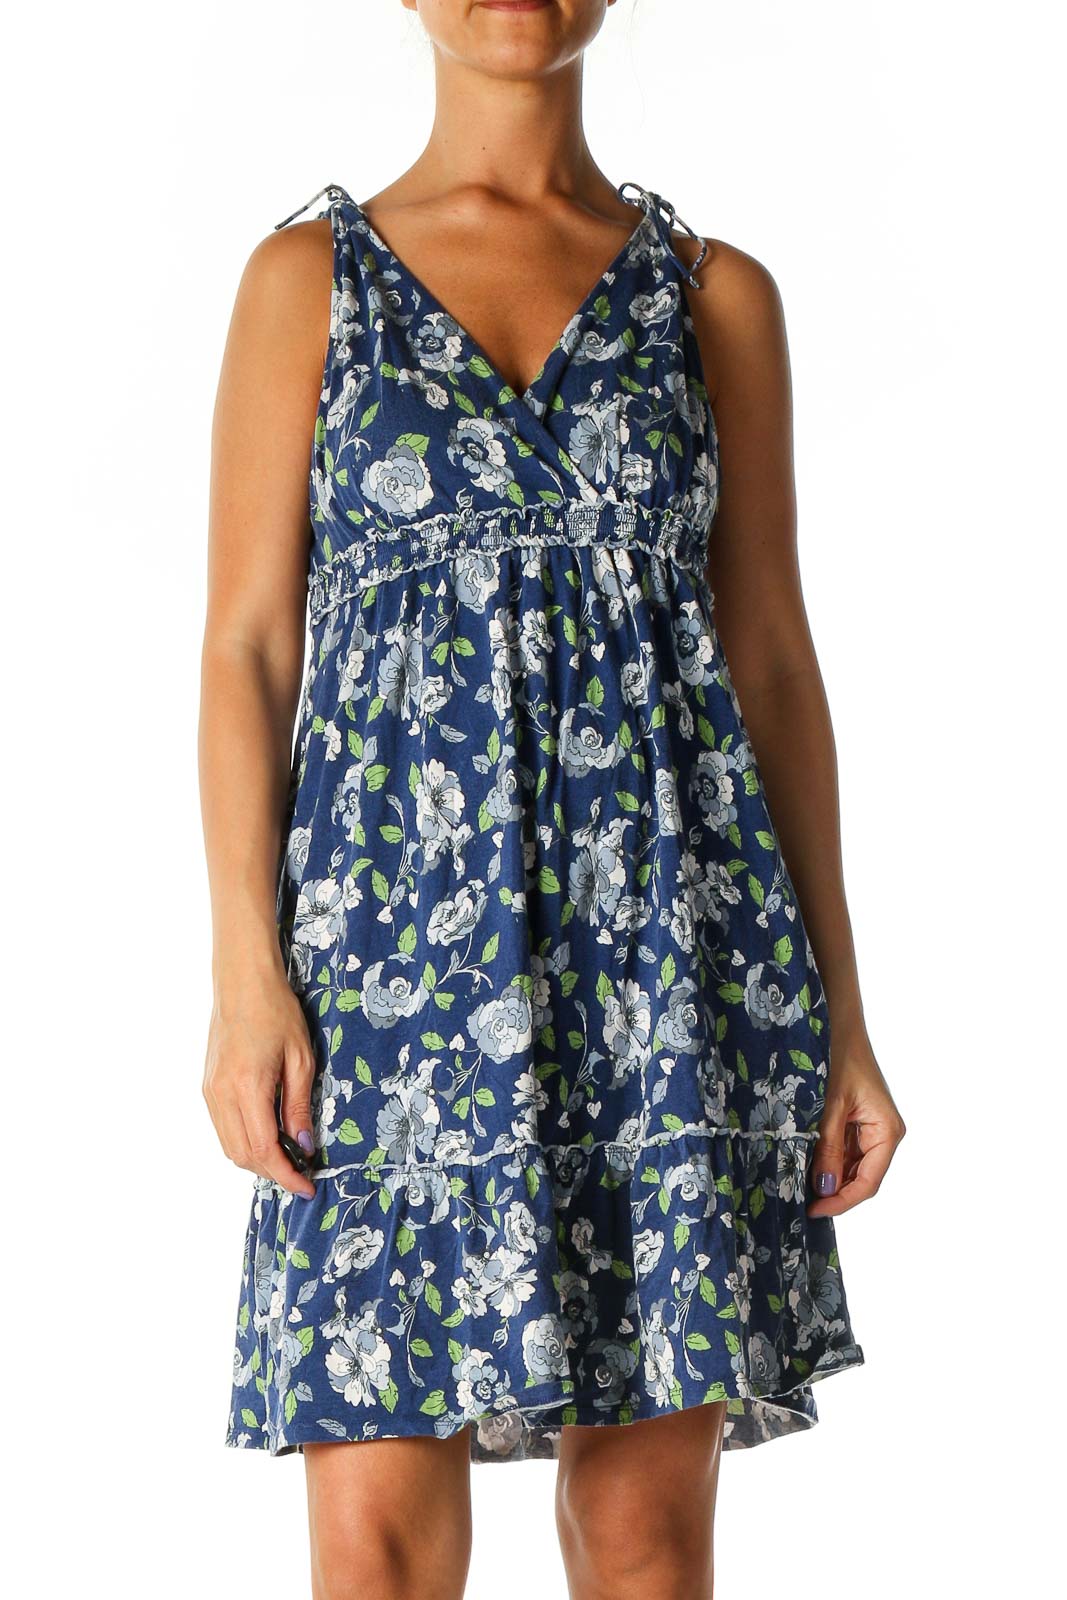 Blue Floral Print Holiday A-Line Dress Front